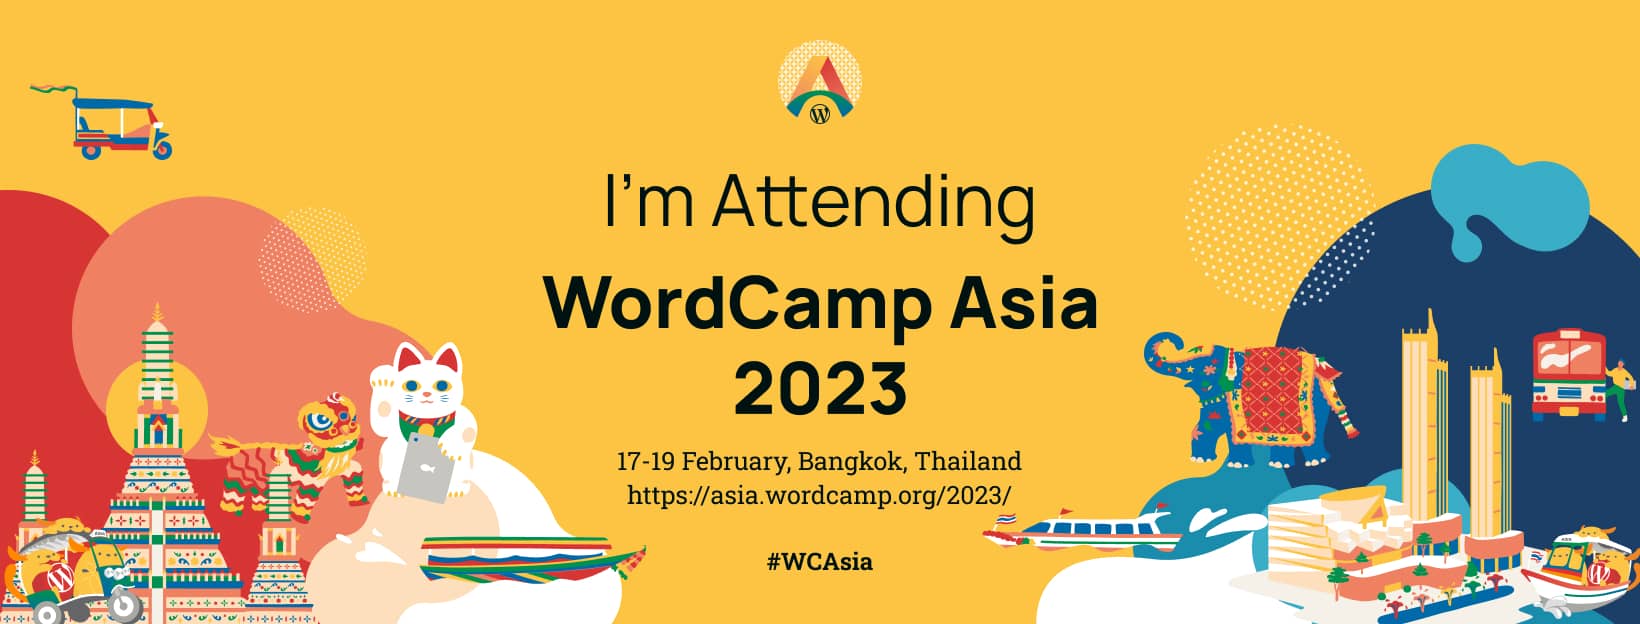 WordCamp Asia 2023: An Exciting Event for the WordPress Community in Bangkok!